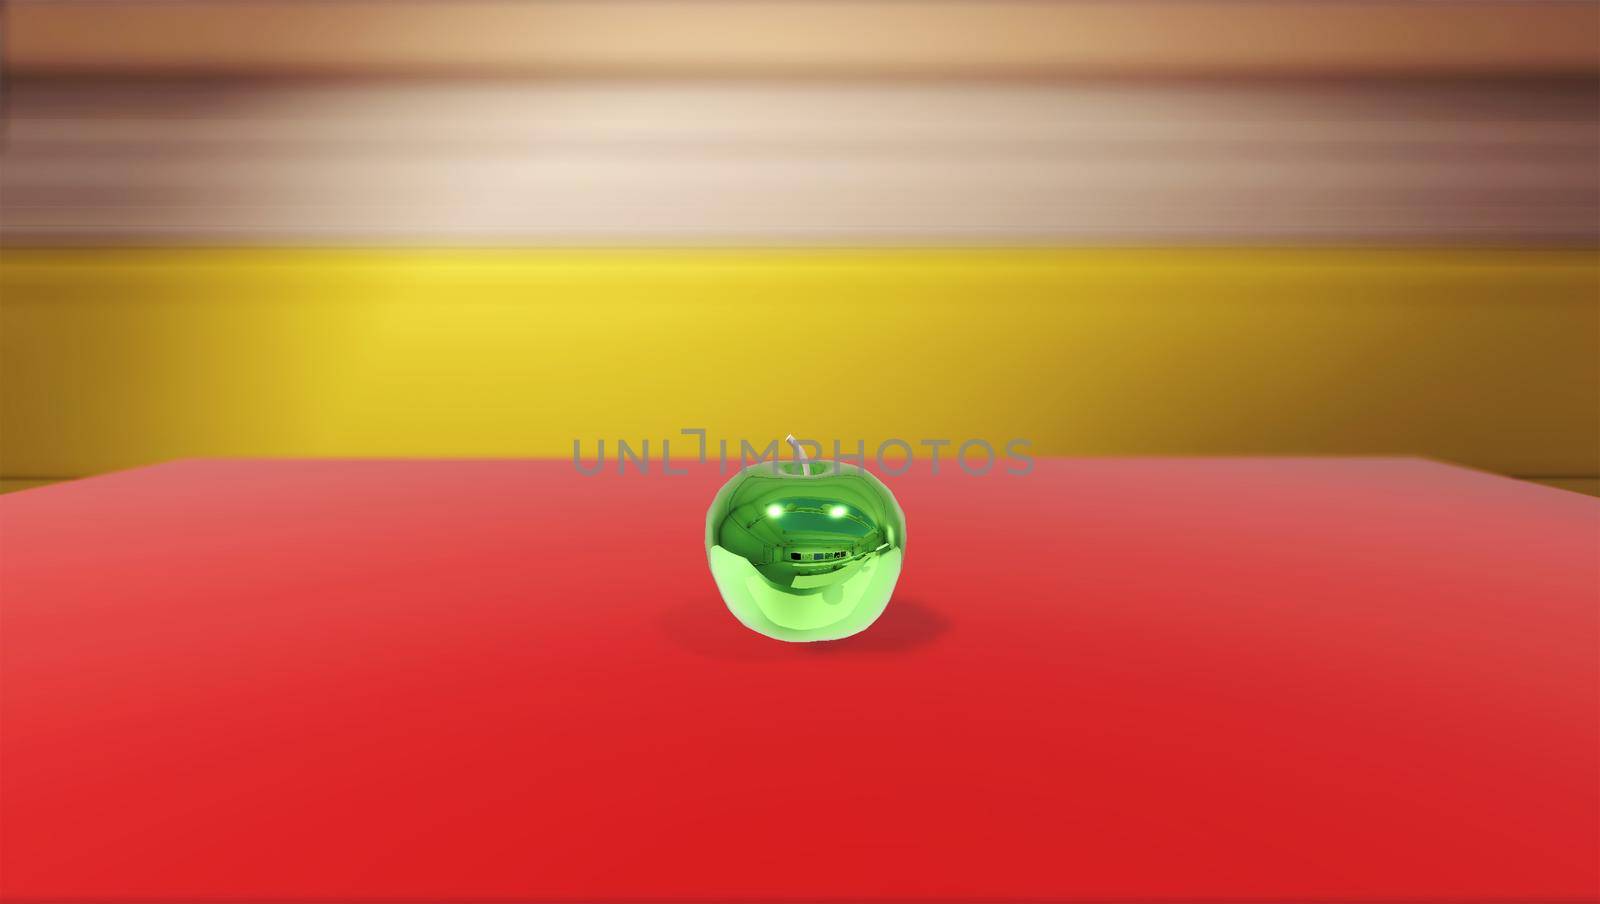 Metal Shine green apple on a red table, studio background by banate